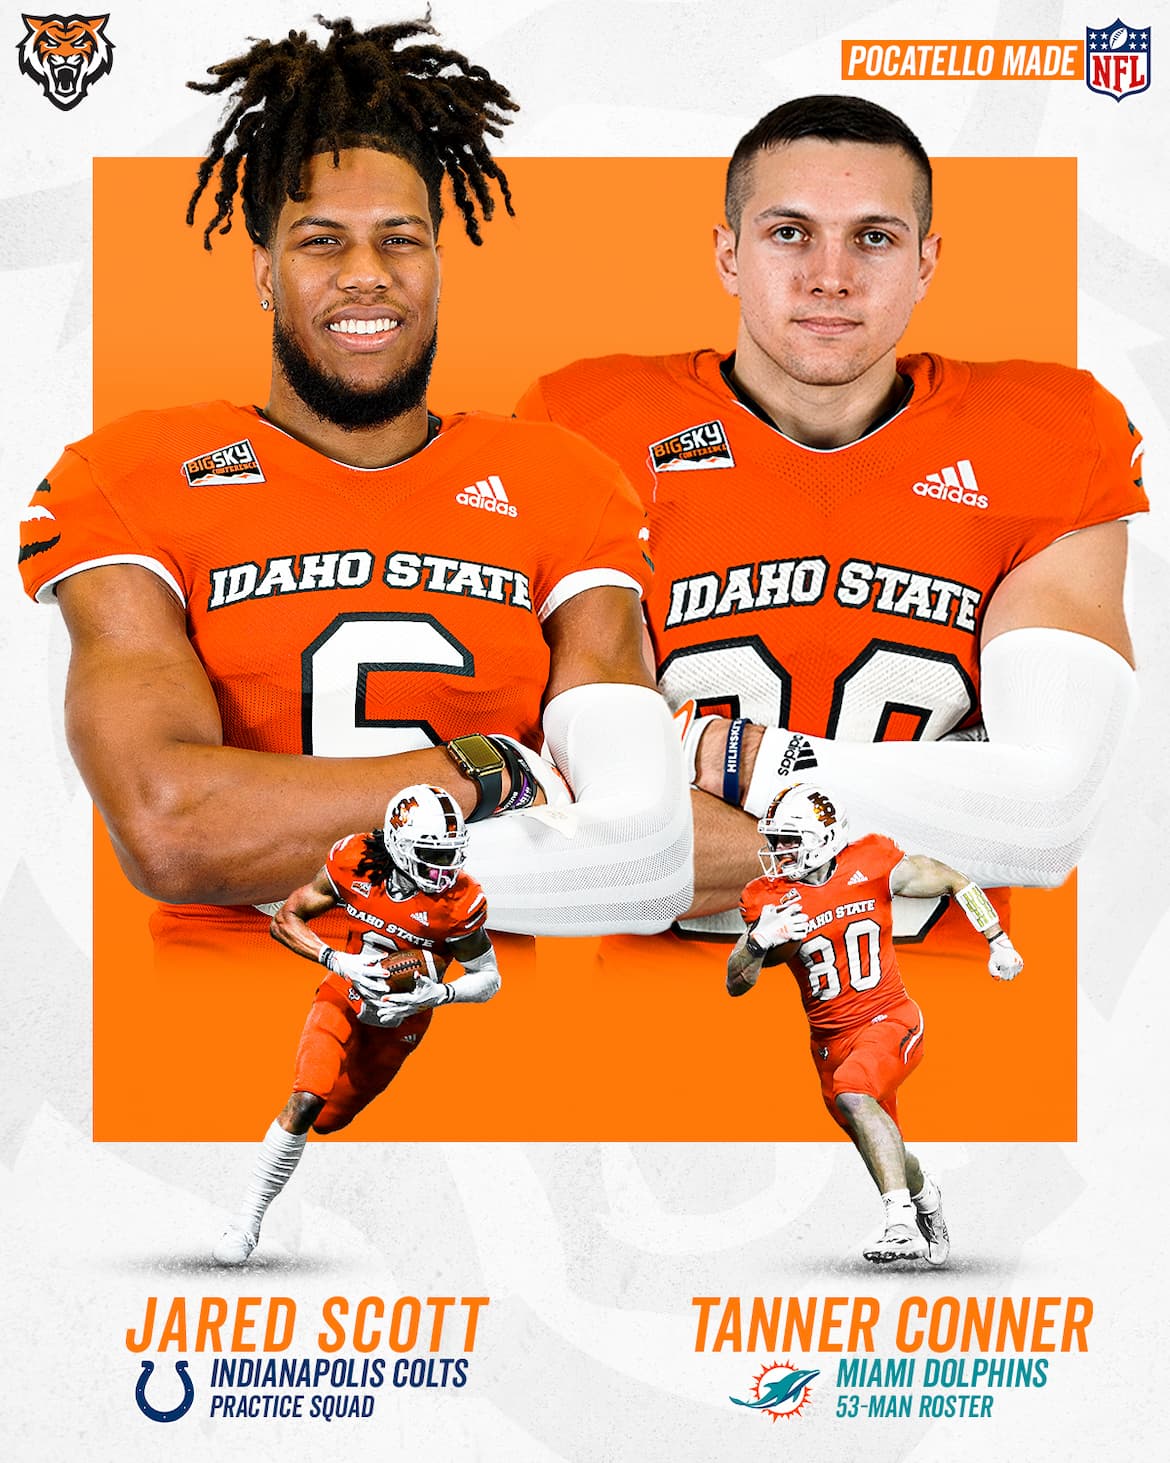 Two Former Bengals Headed to the NFL | Idaho State University